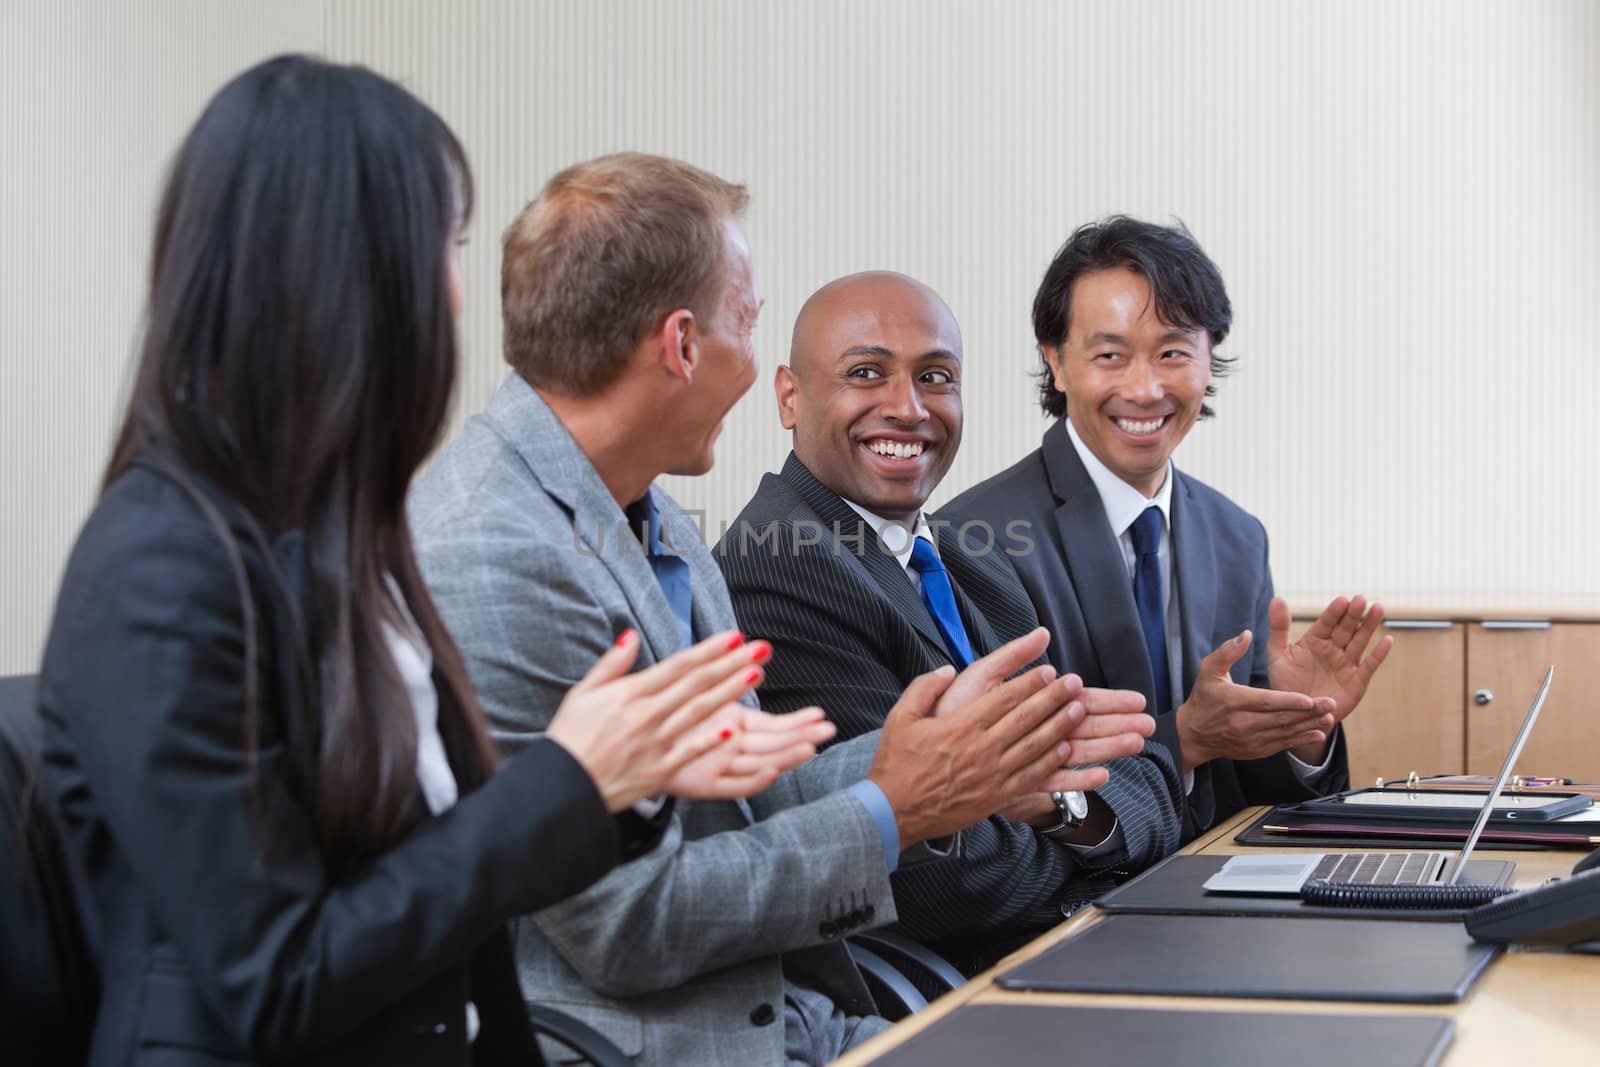 Professionals applauding during a business meeting by leaf